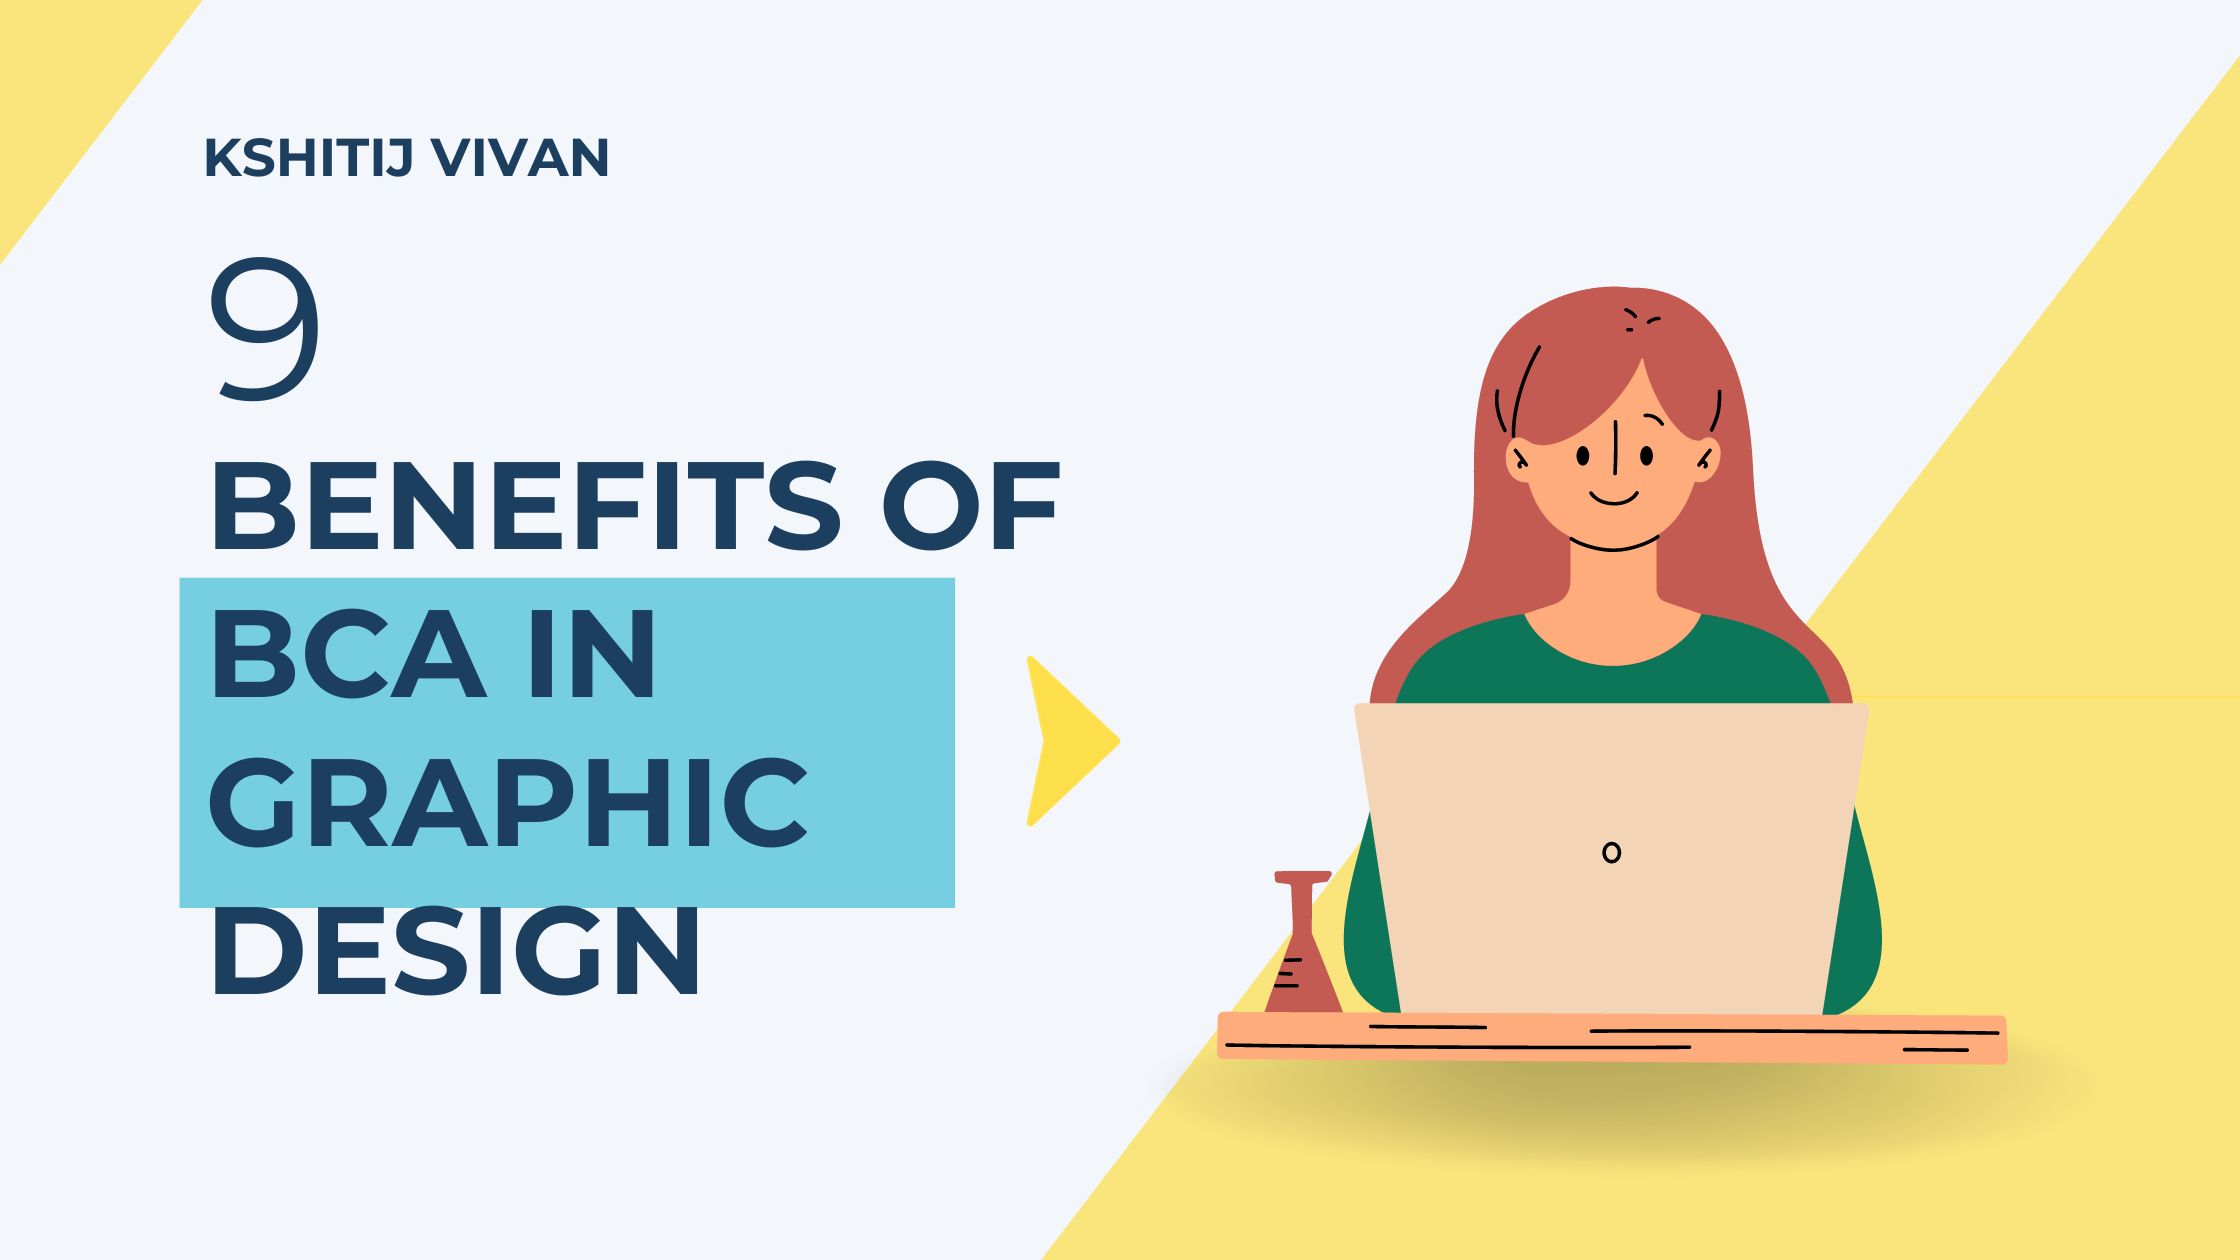 Key Benefits of a BCA in Graphic Design Career